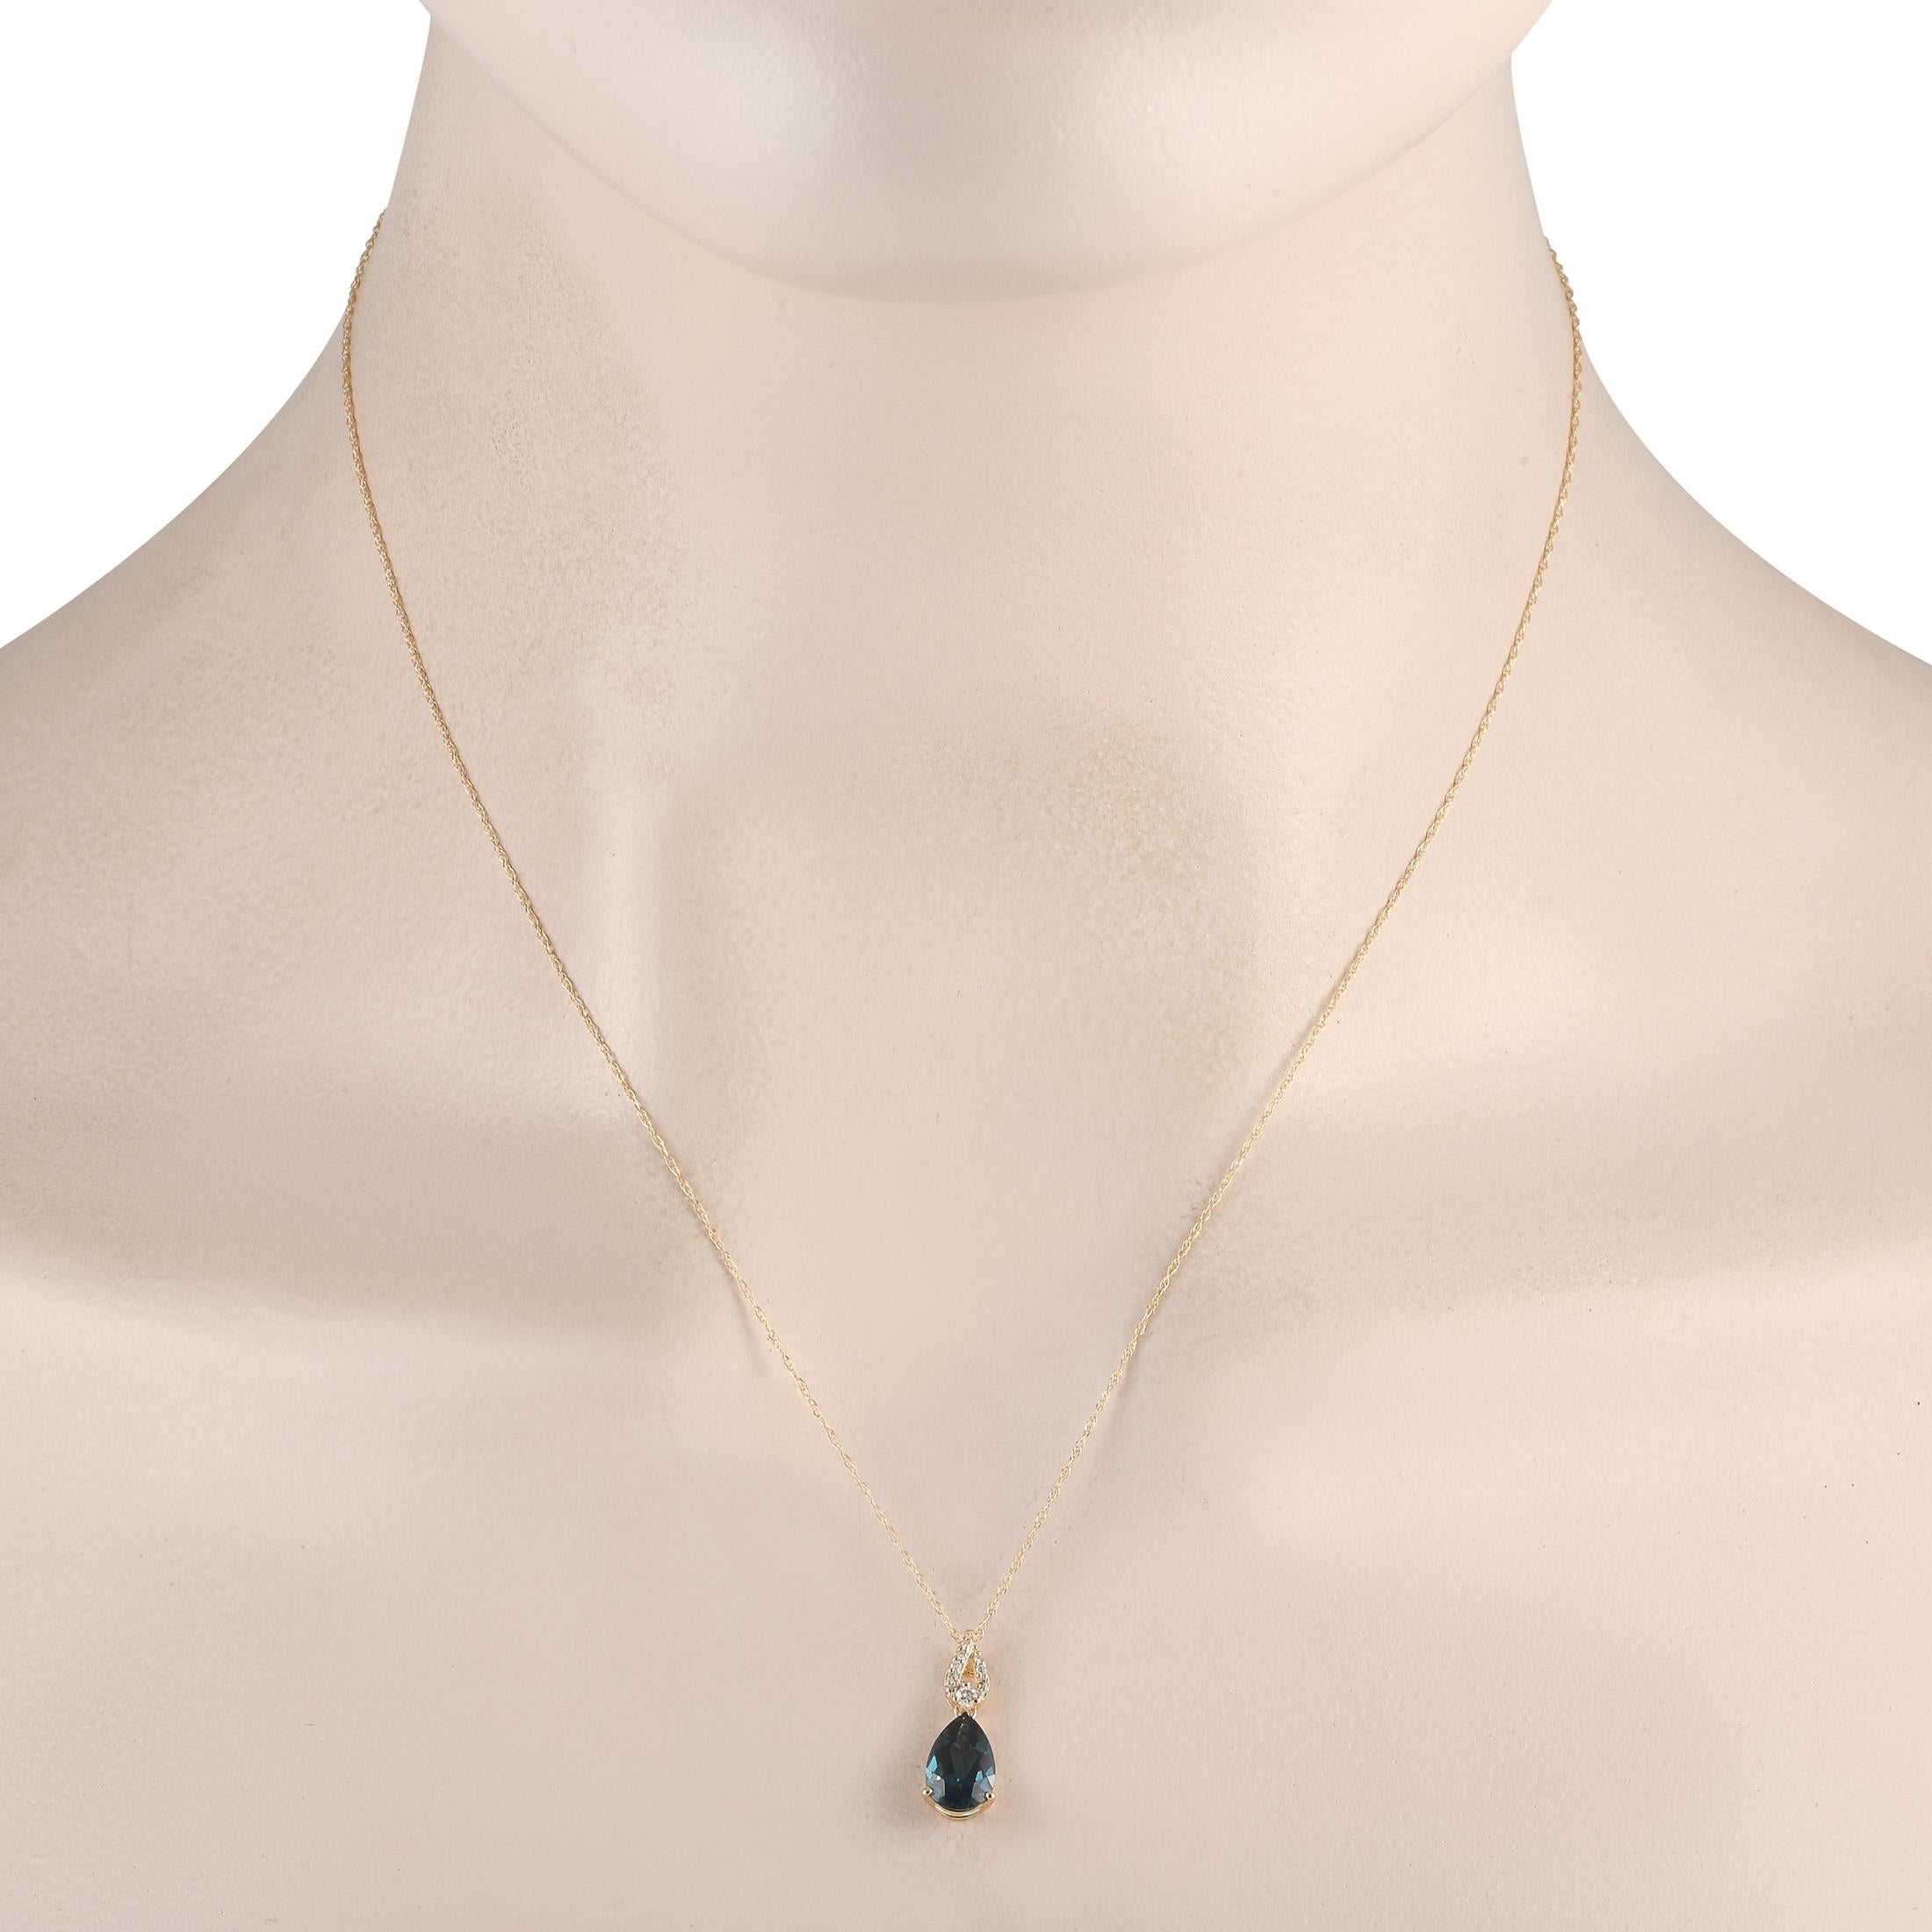 A pear-shaped Blue Topaz adds a pop of color to this sleek, sophisticated necklace. A 14K Yellow Gold pendant measuring 0.65 long by 0.25 wide is suspended from an 18 chain on this elegant accessory, which also includes sparkling Diamond accents